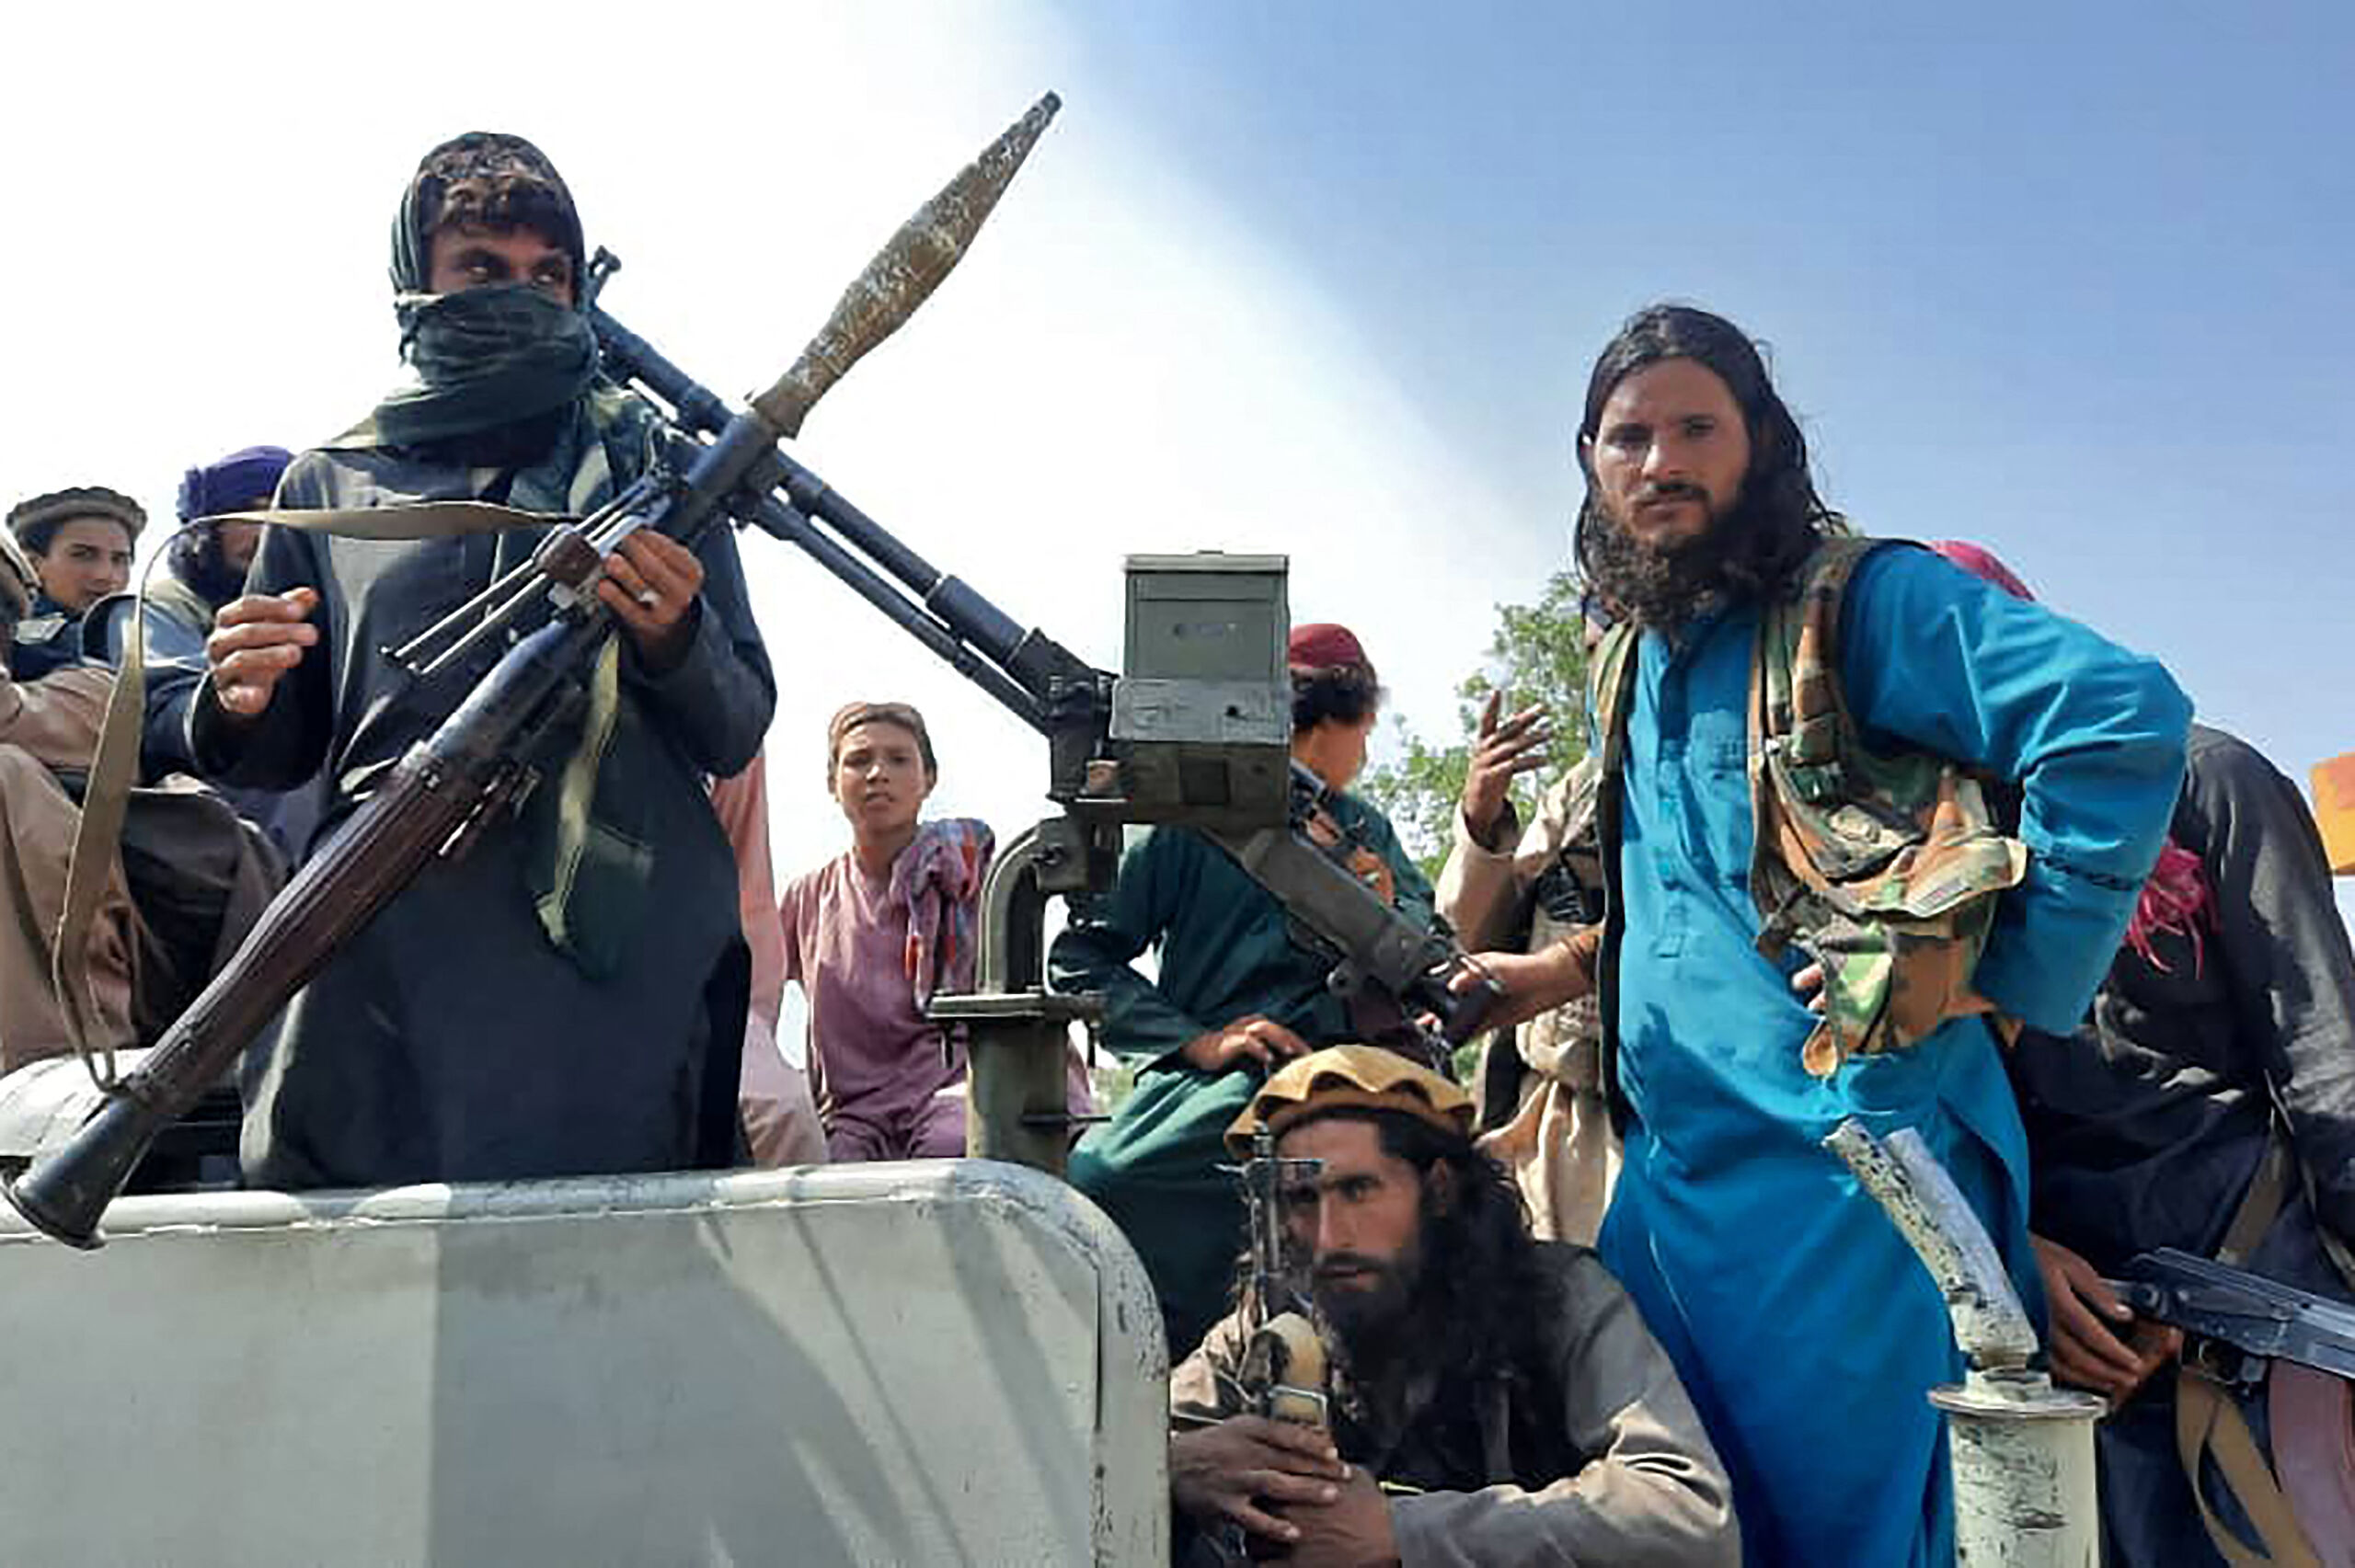 Taliban fighters sit over a vehicle on a street in Laghman province on August 15, 2021.  AFP